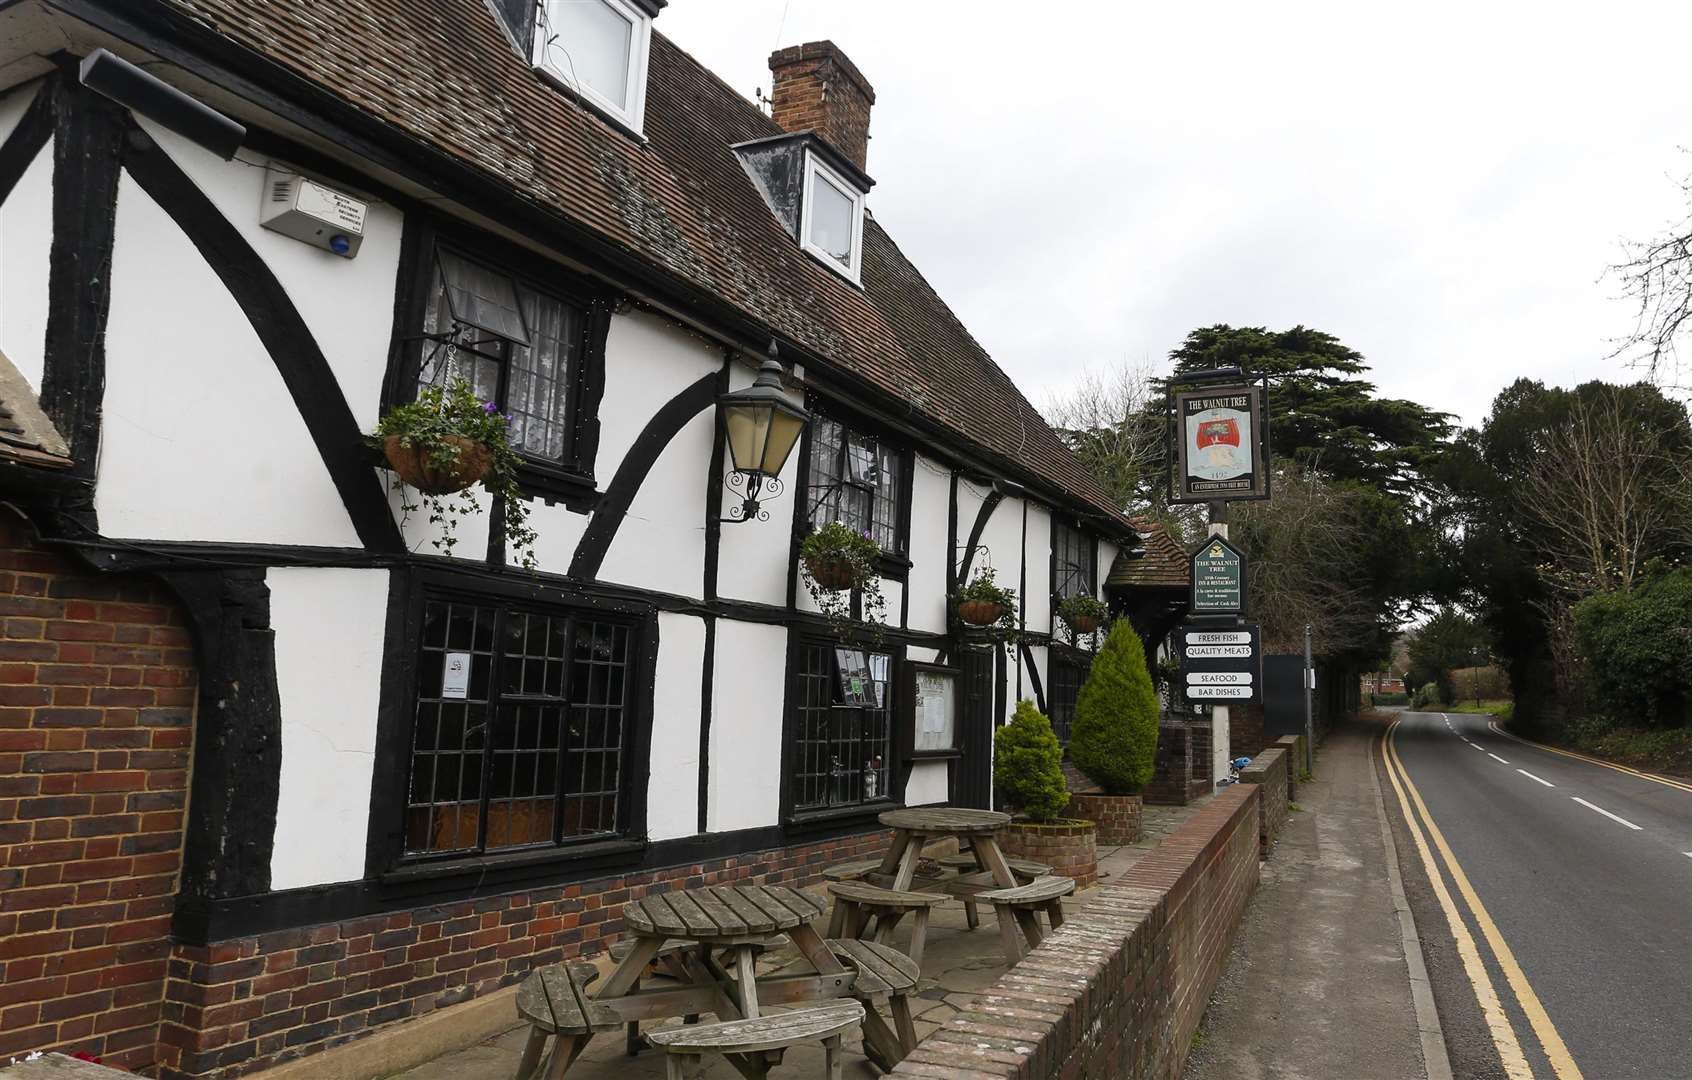 Taylor was refused beer at the Walnut Tree pub in Yalding